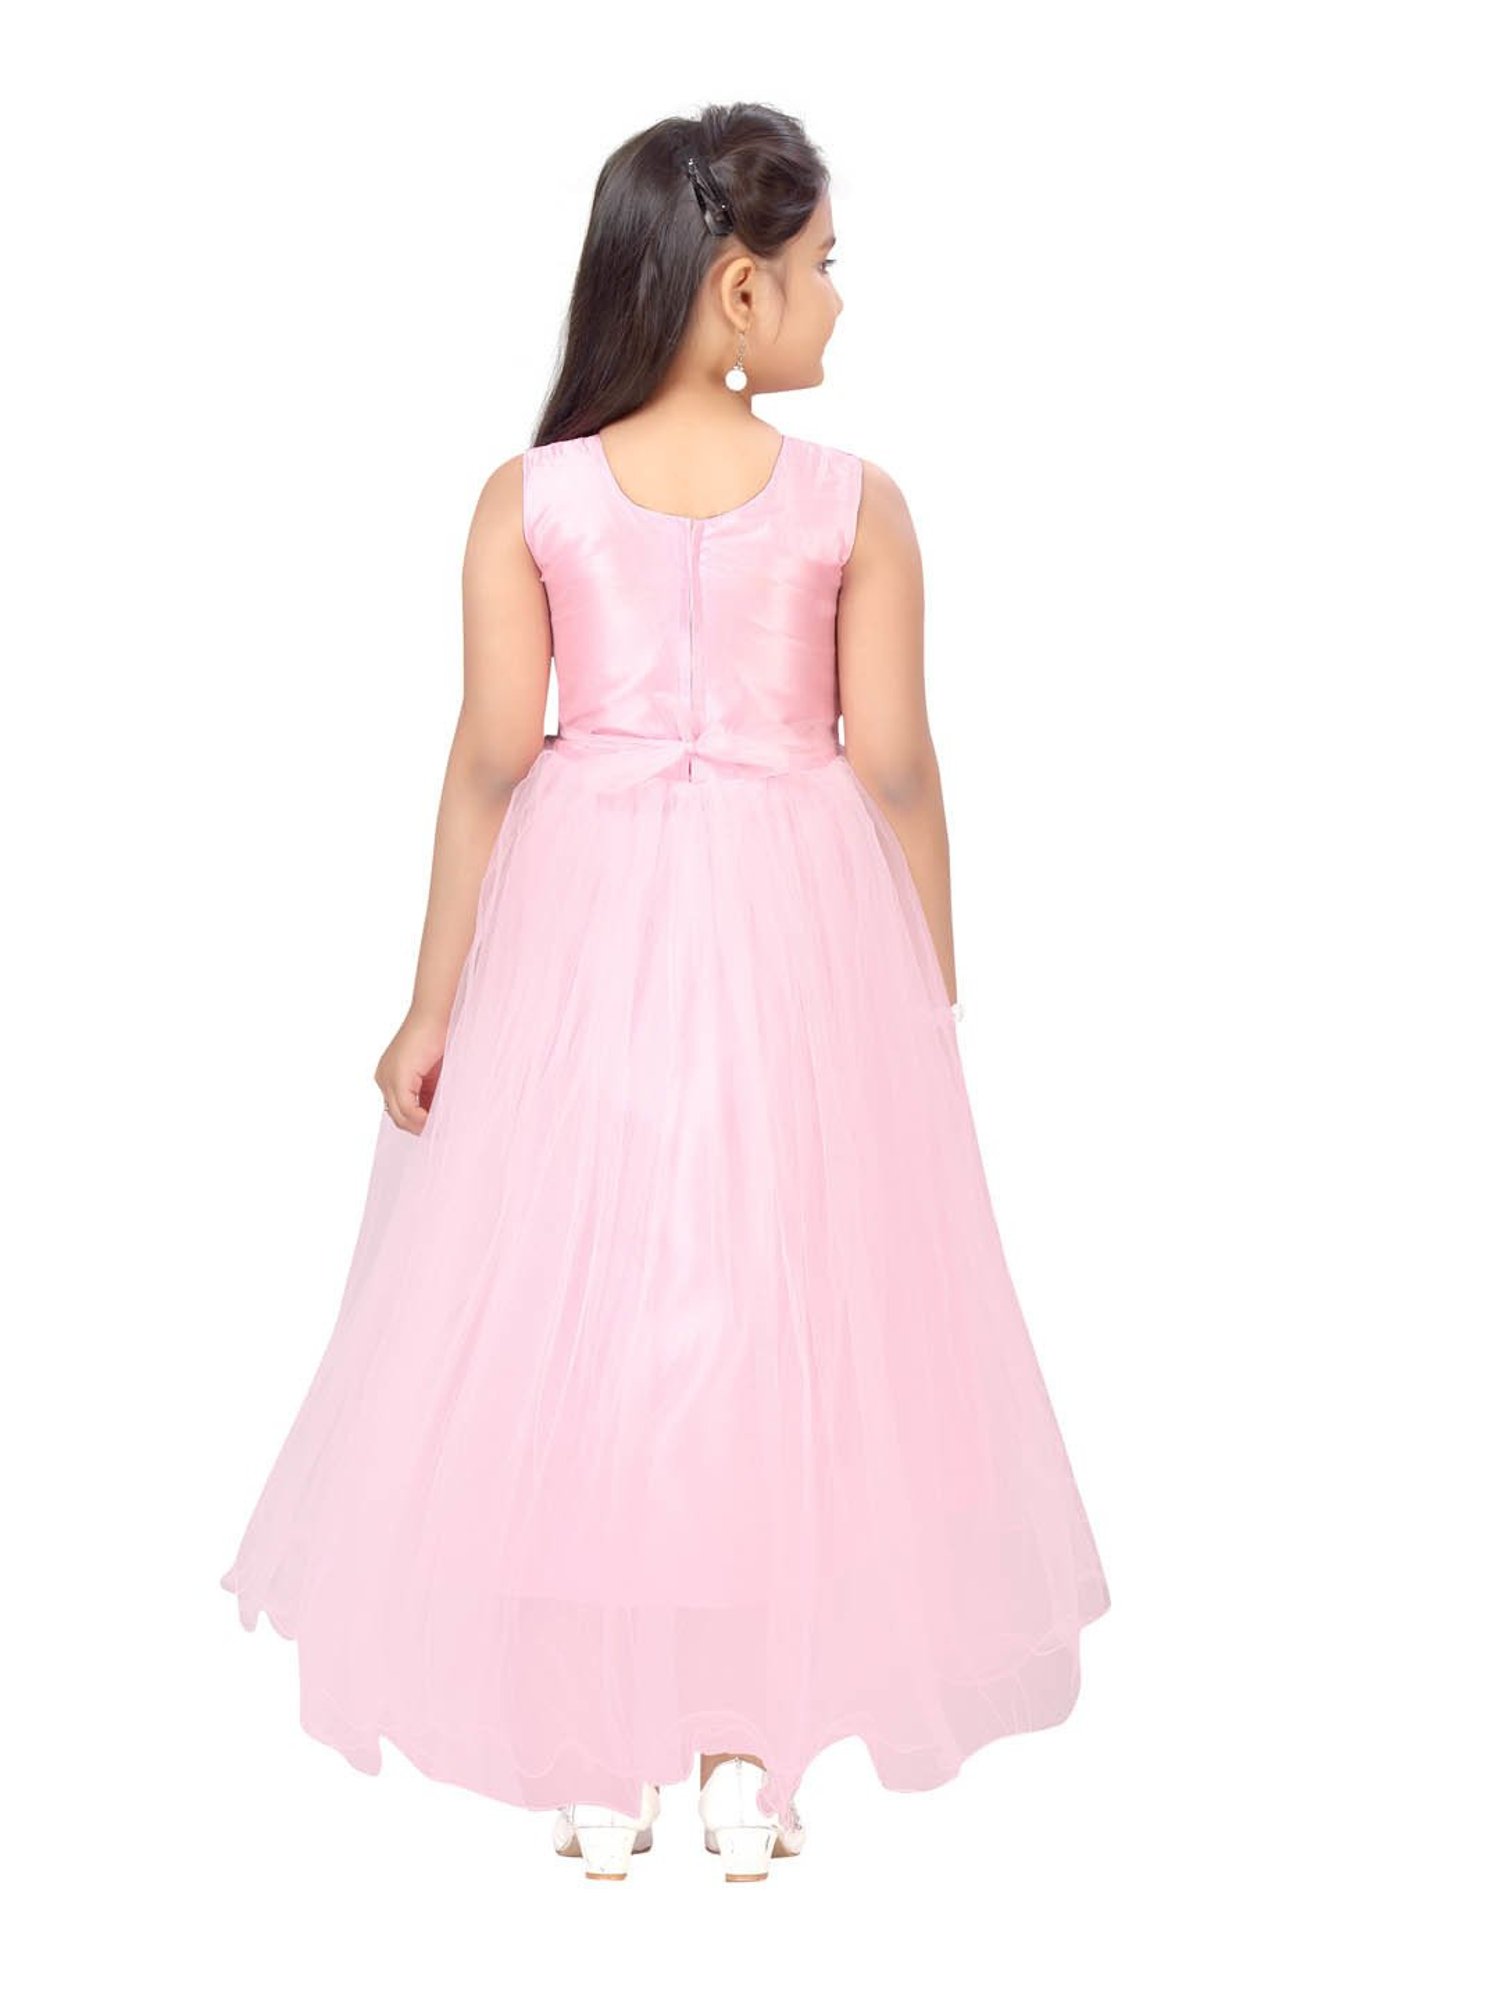 Pink Sheer Neck Ball Gown Blush Pink Childrens Dress With Beaded Bow Tie  And Cap Sleeves For Weddings, Birthdays, Pageants, And First Communion From  Weddingpromgirl, $92.93 | DHgate.Com